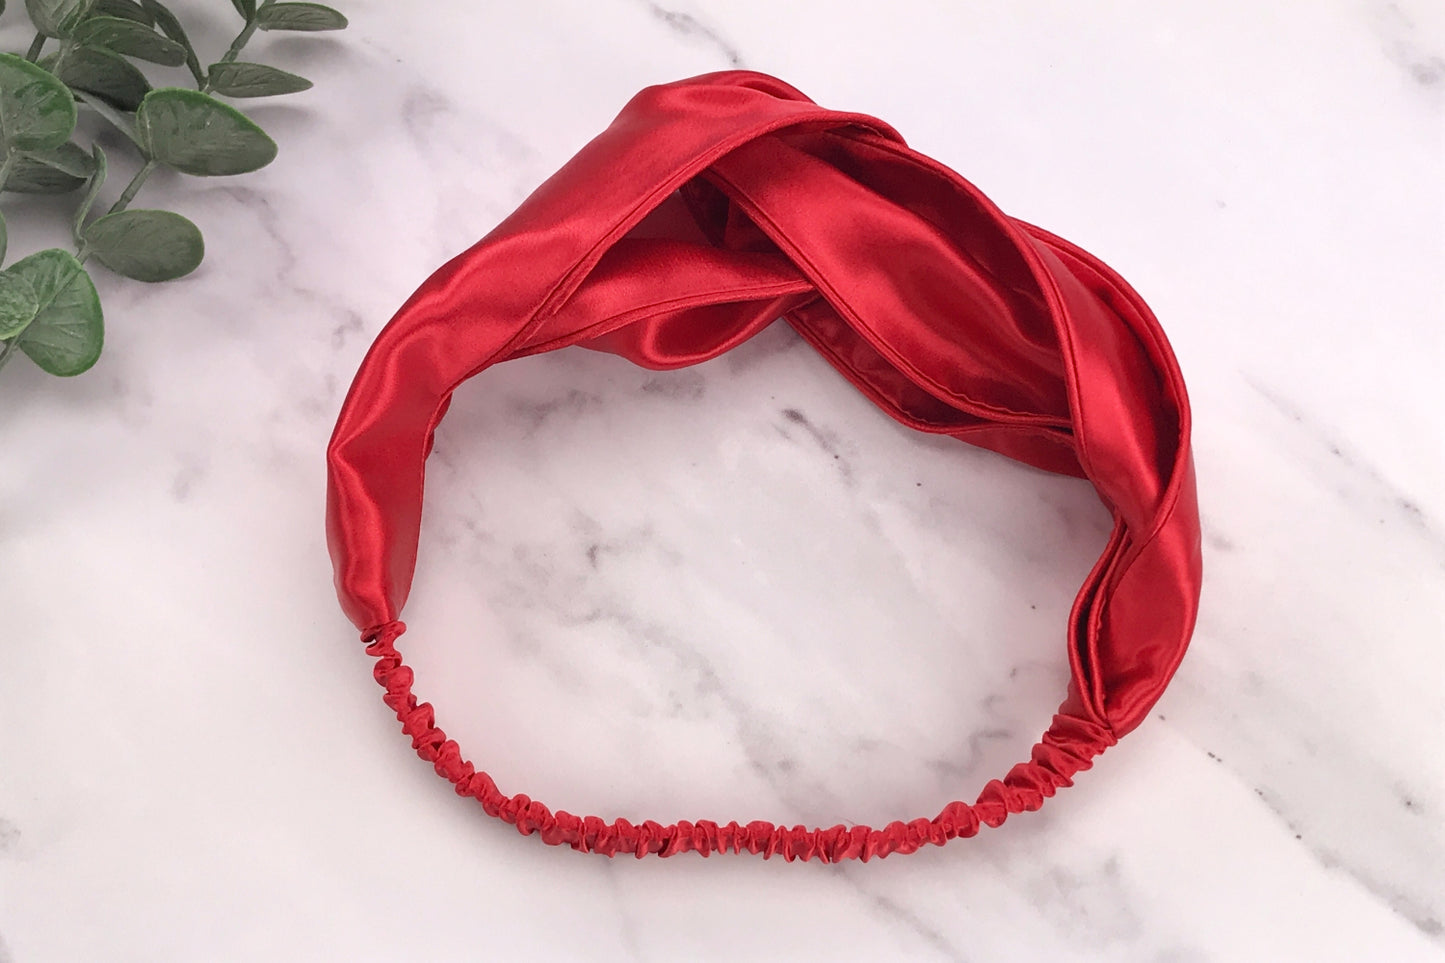 celestial silk twisted red silk headband for hair on counter with aloe